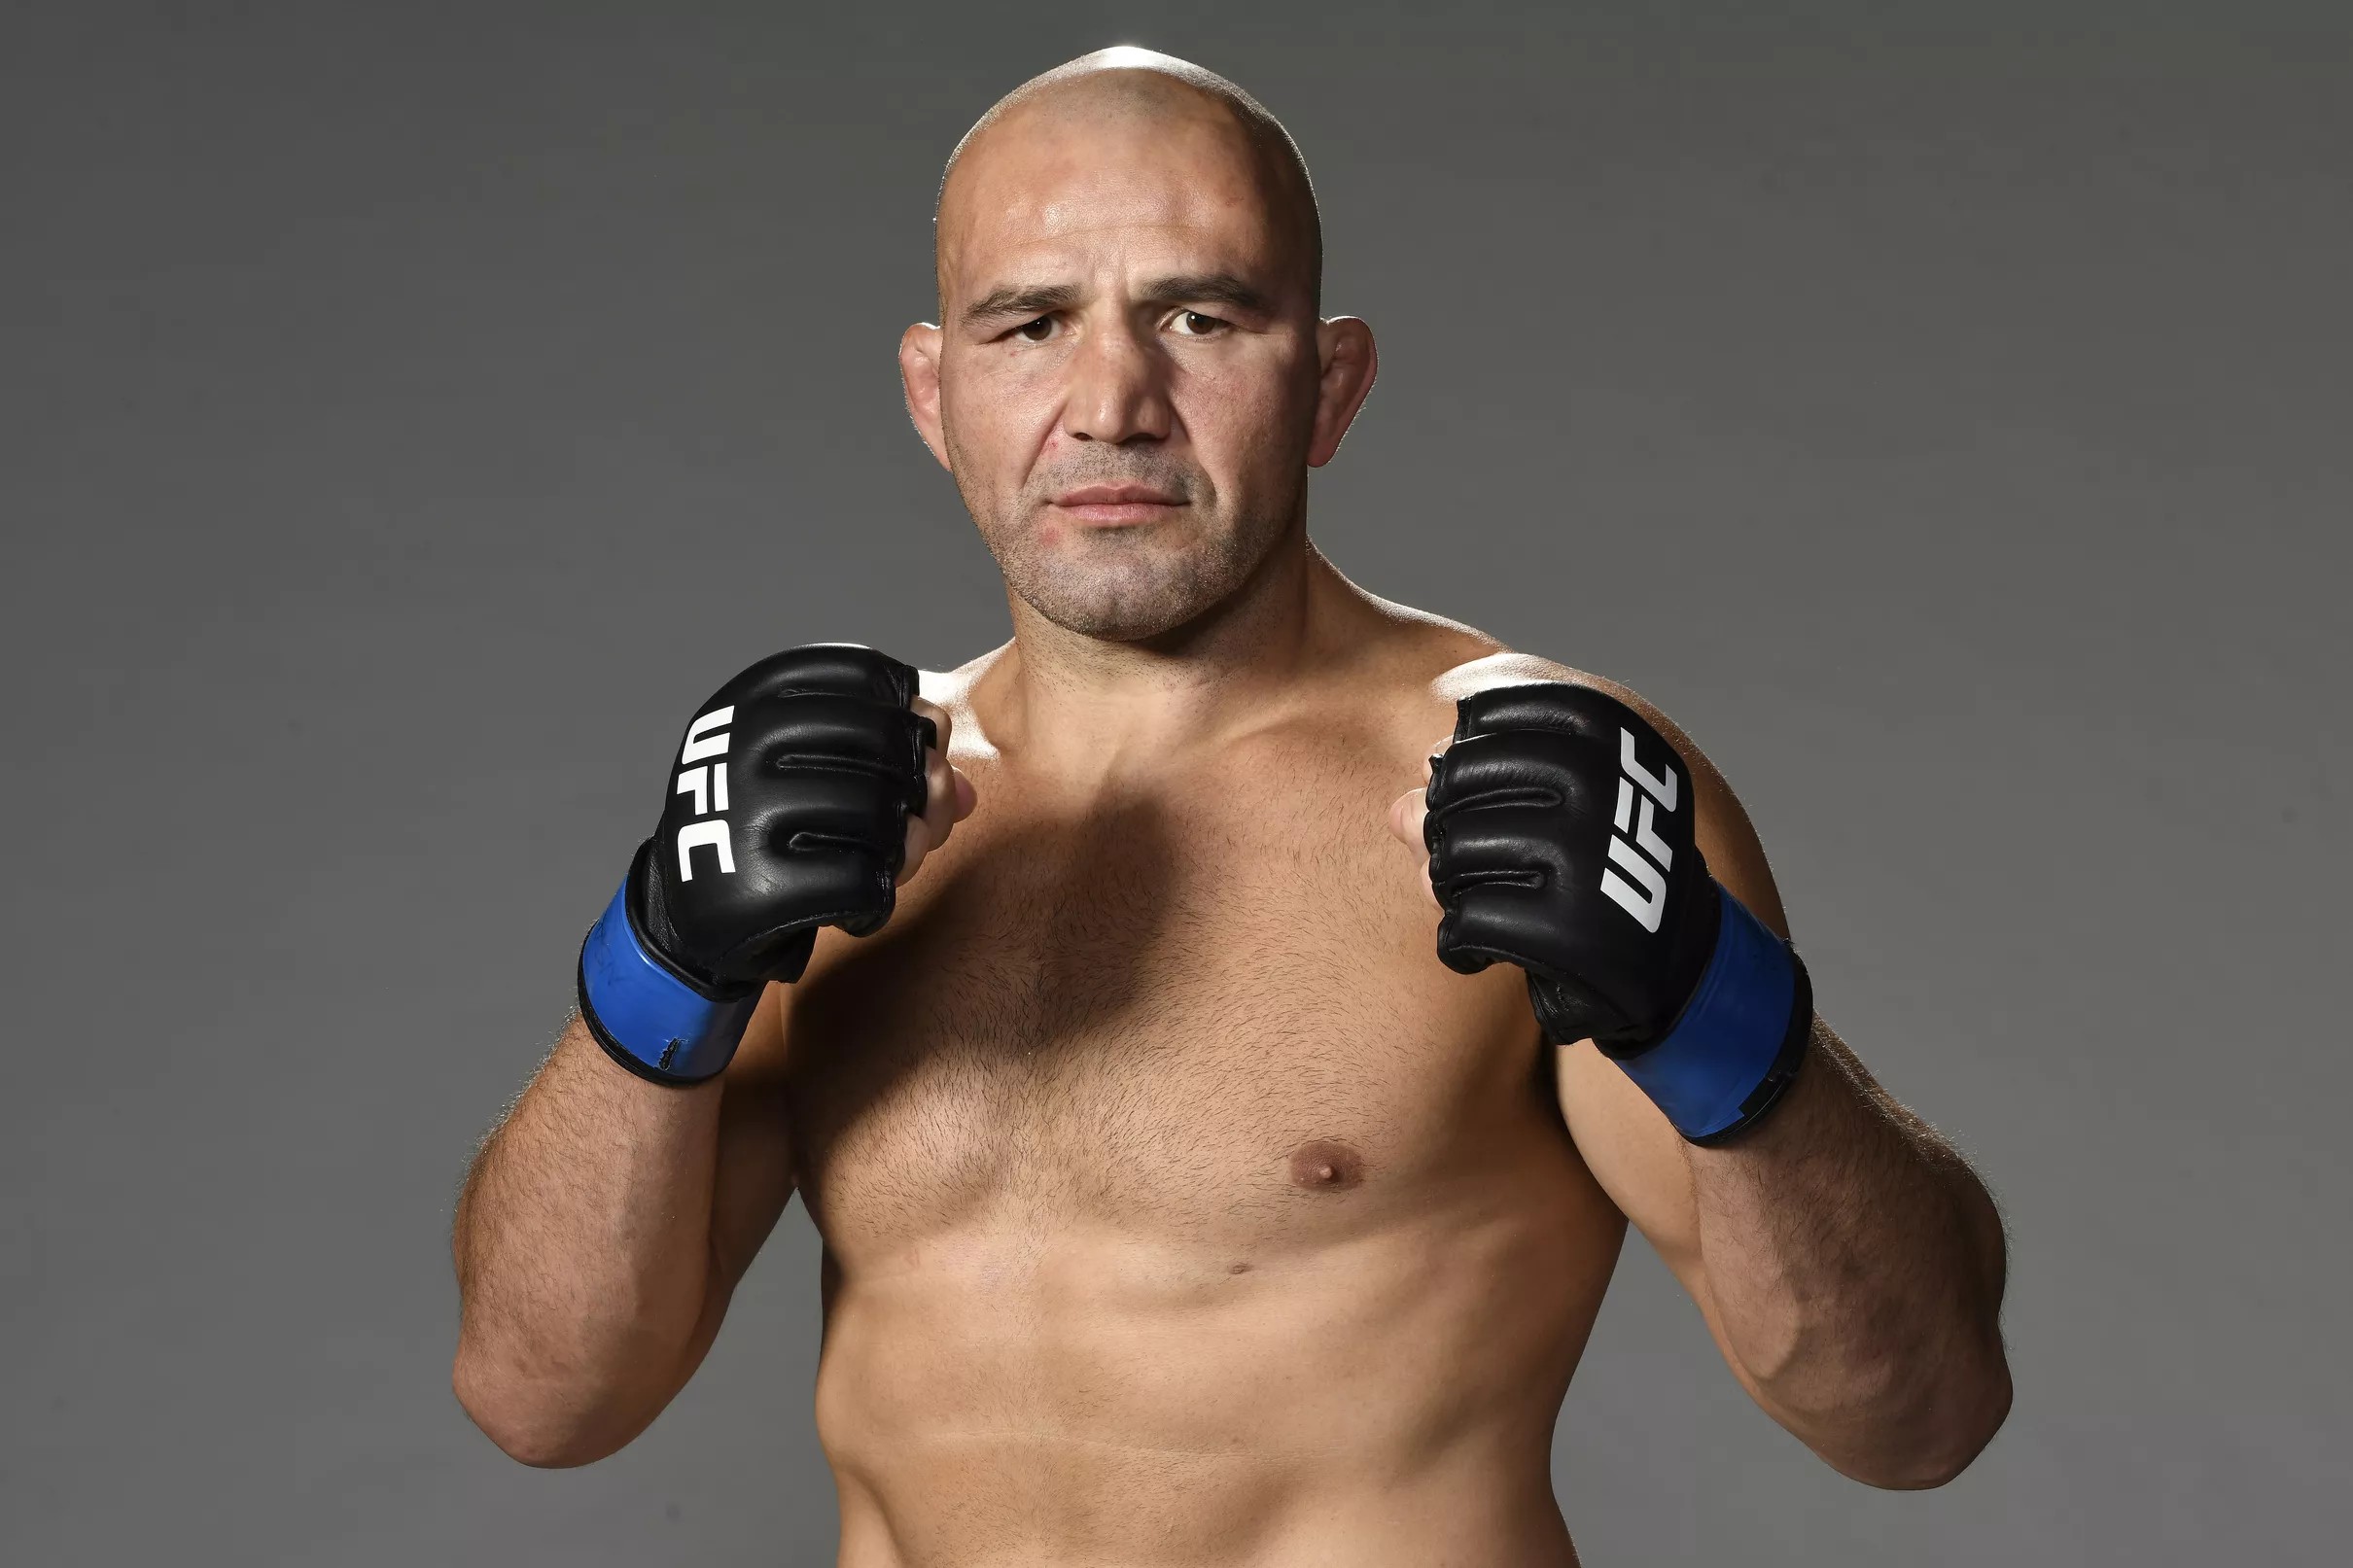 UFC fighter rankings: There’s a new top contender at light heavyweight